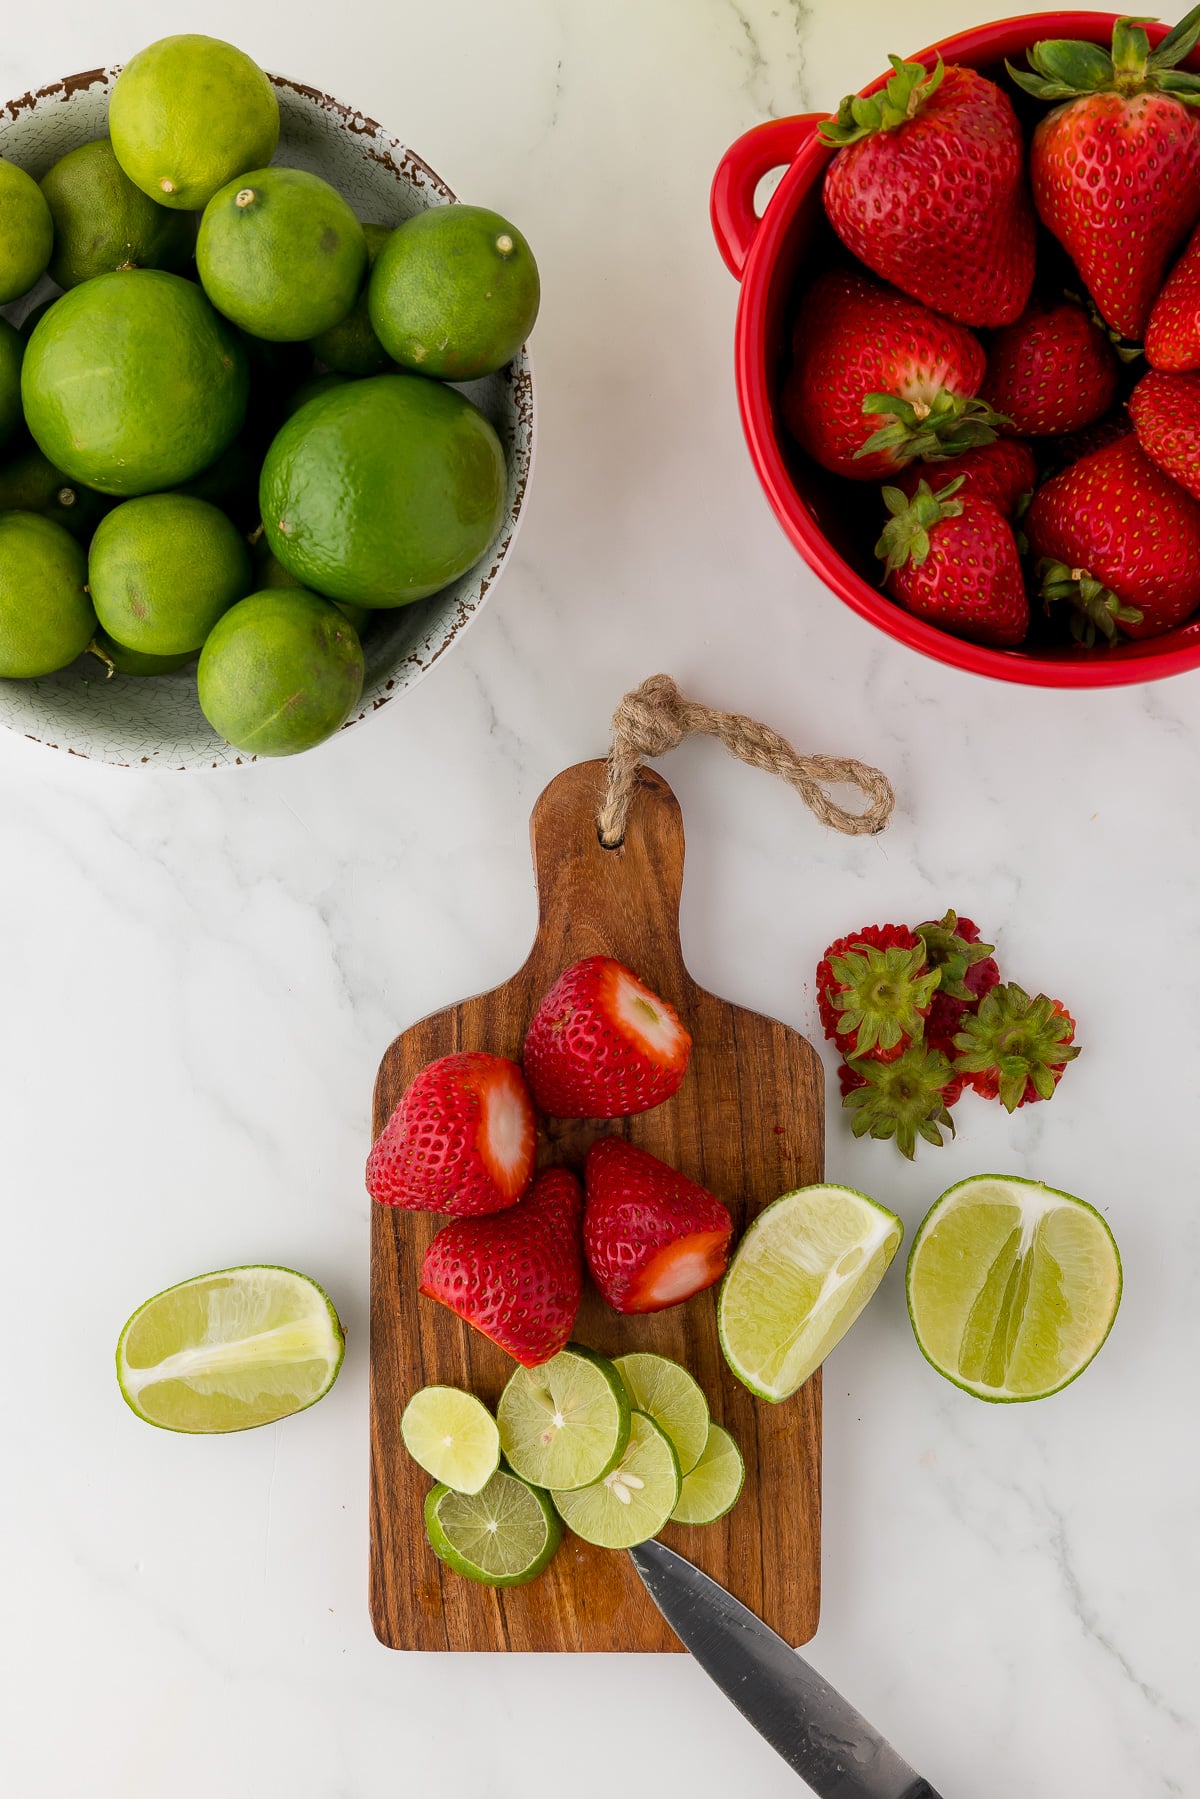 strawberries and limes on a wooden cutting board next to a large bowl of limes and a red bowl of strawberries